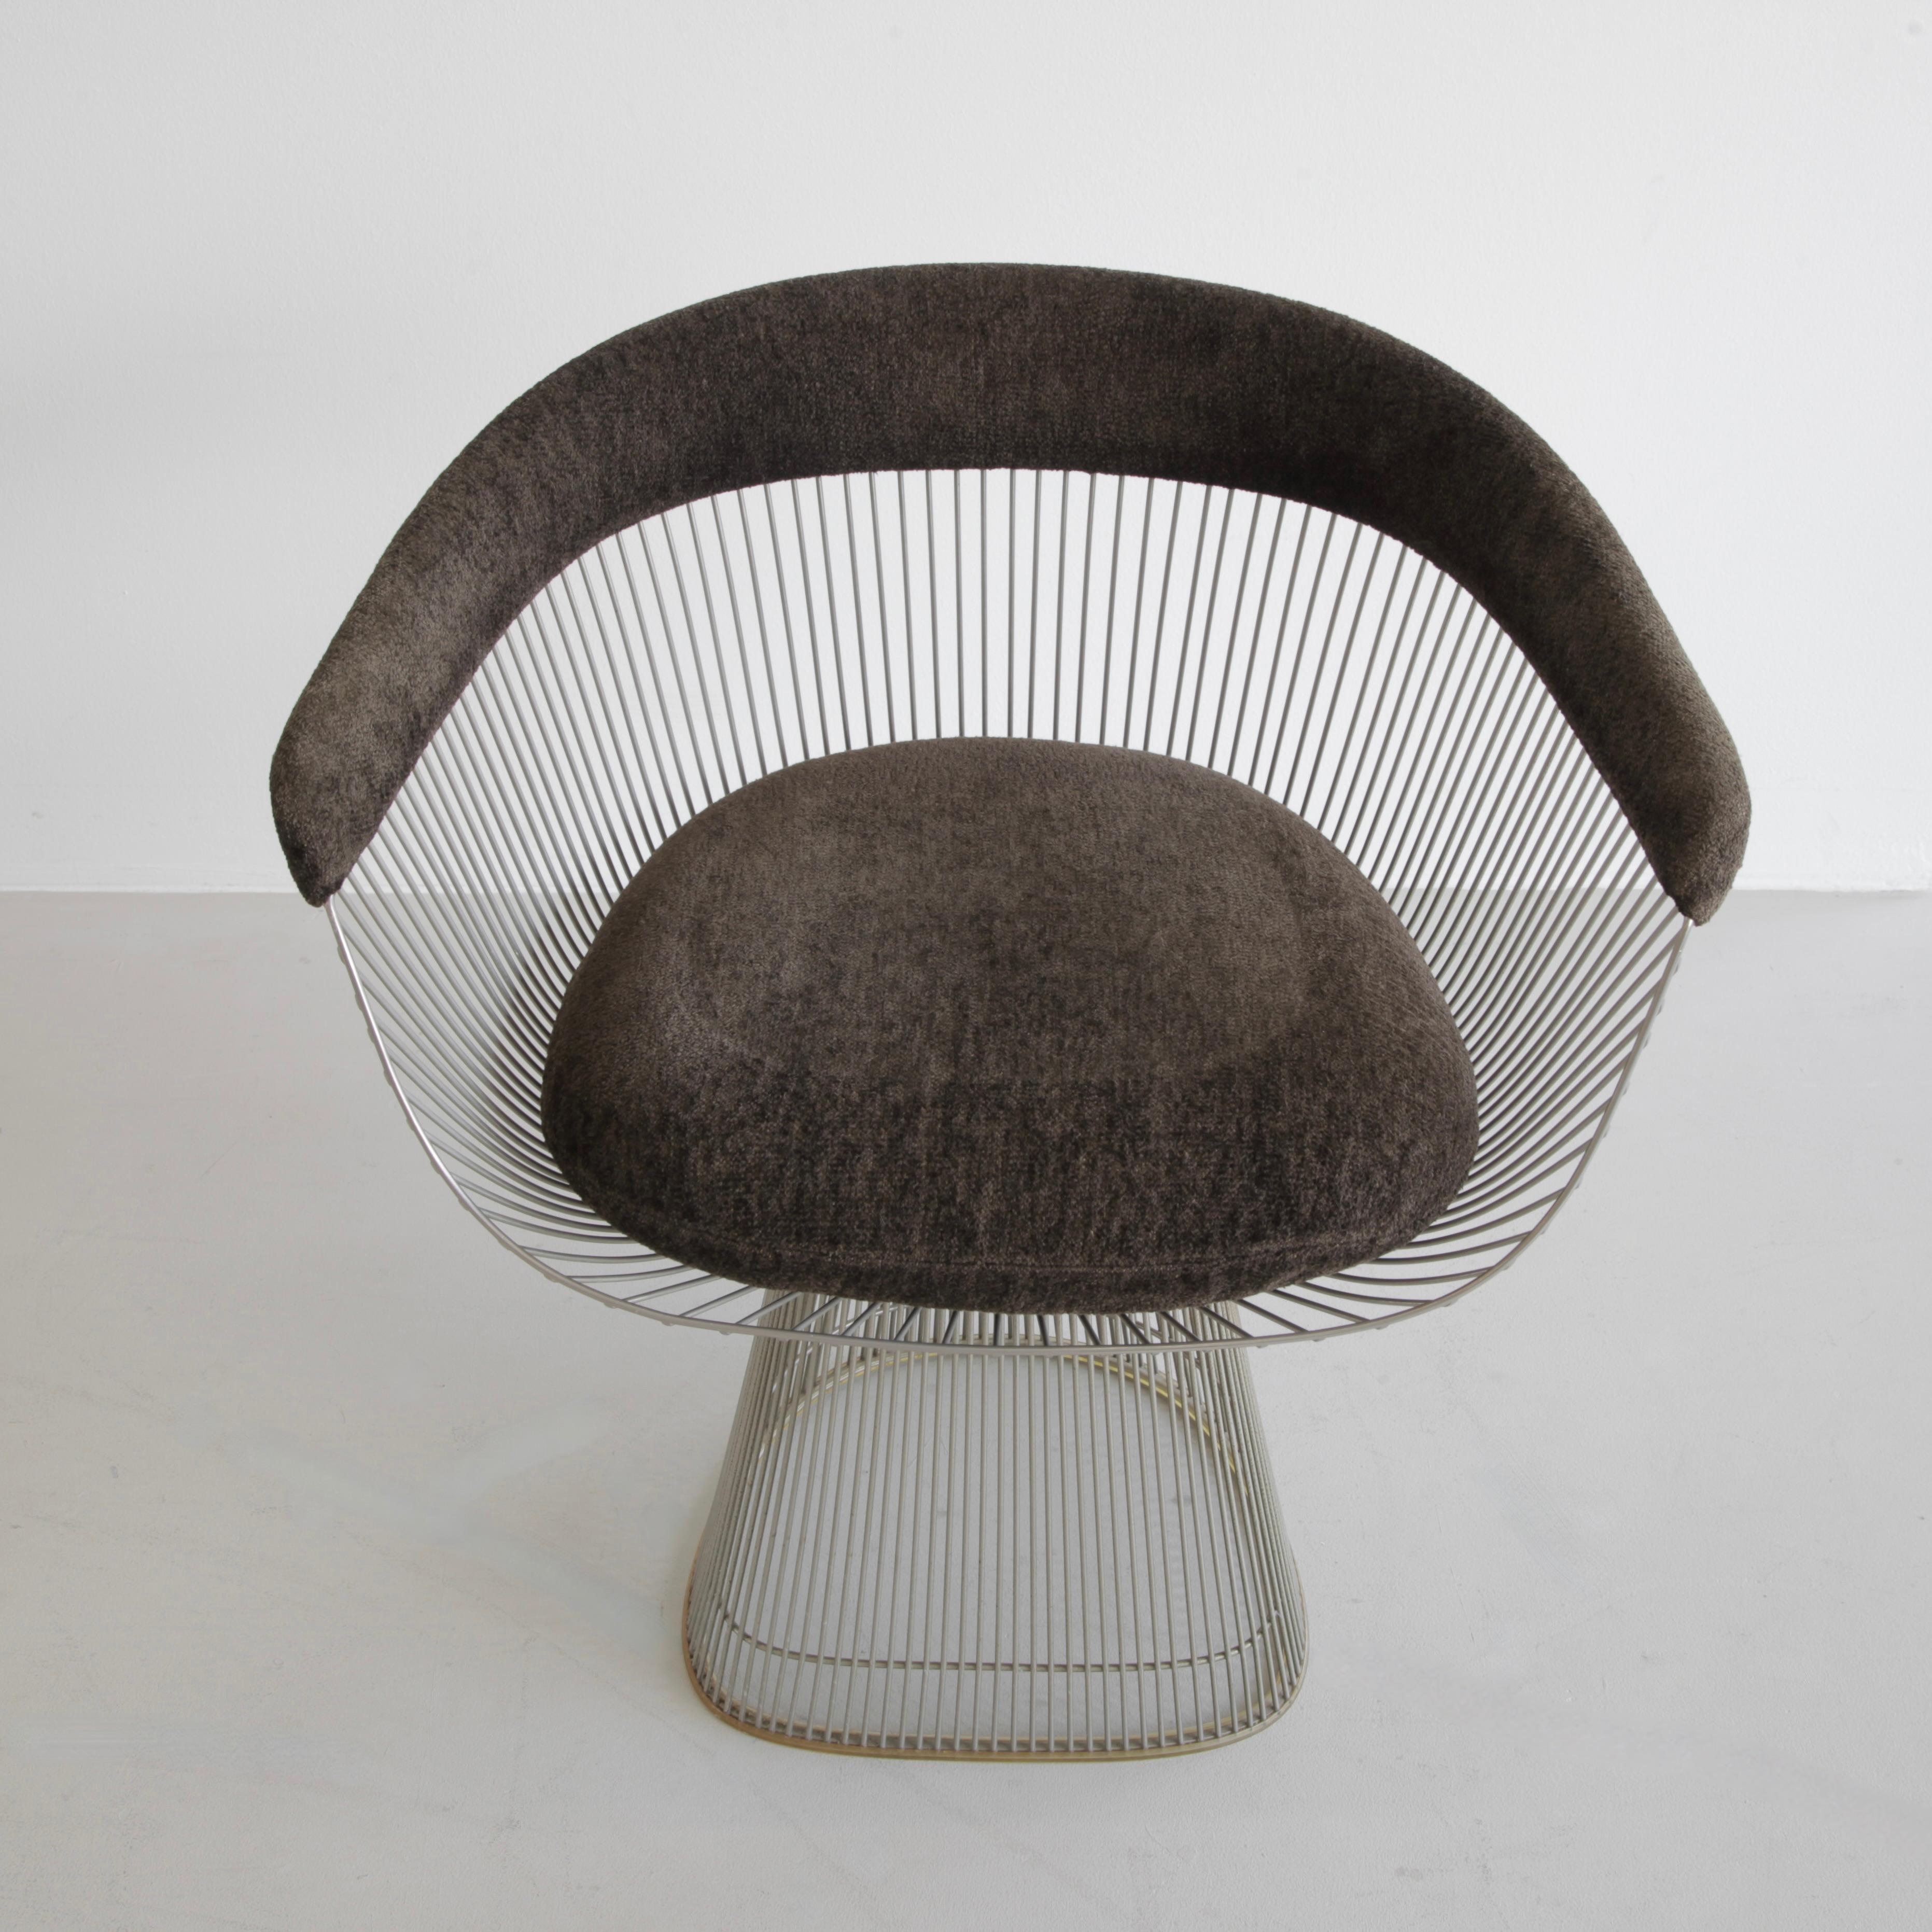 Armchair designed by Warren Platner. U.S.A., Knoll International, 1966.

Wonderful vintage chair in polished nickel, upholstered in dark chocolate velvet. A perfect chair dating from the 1970's.

Literature: Fiell, Charlotte & Peter. Die